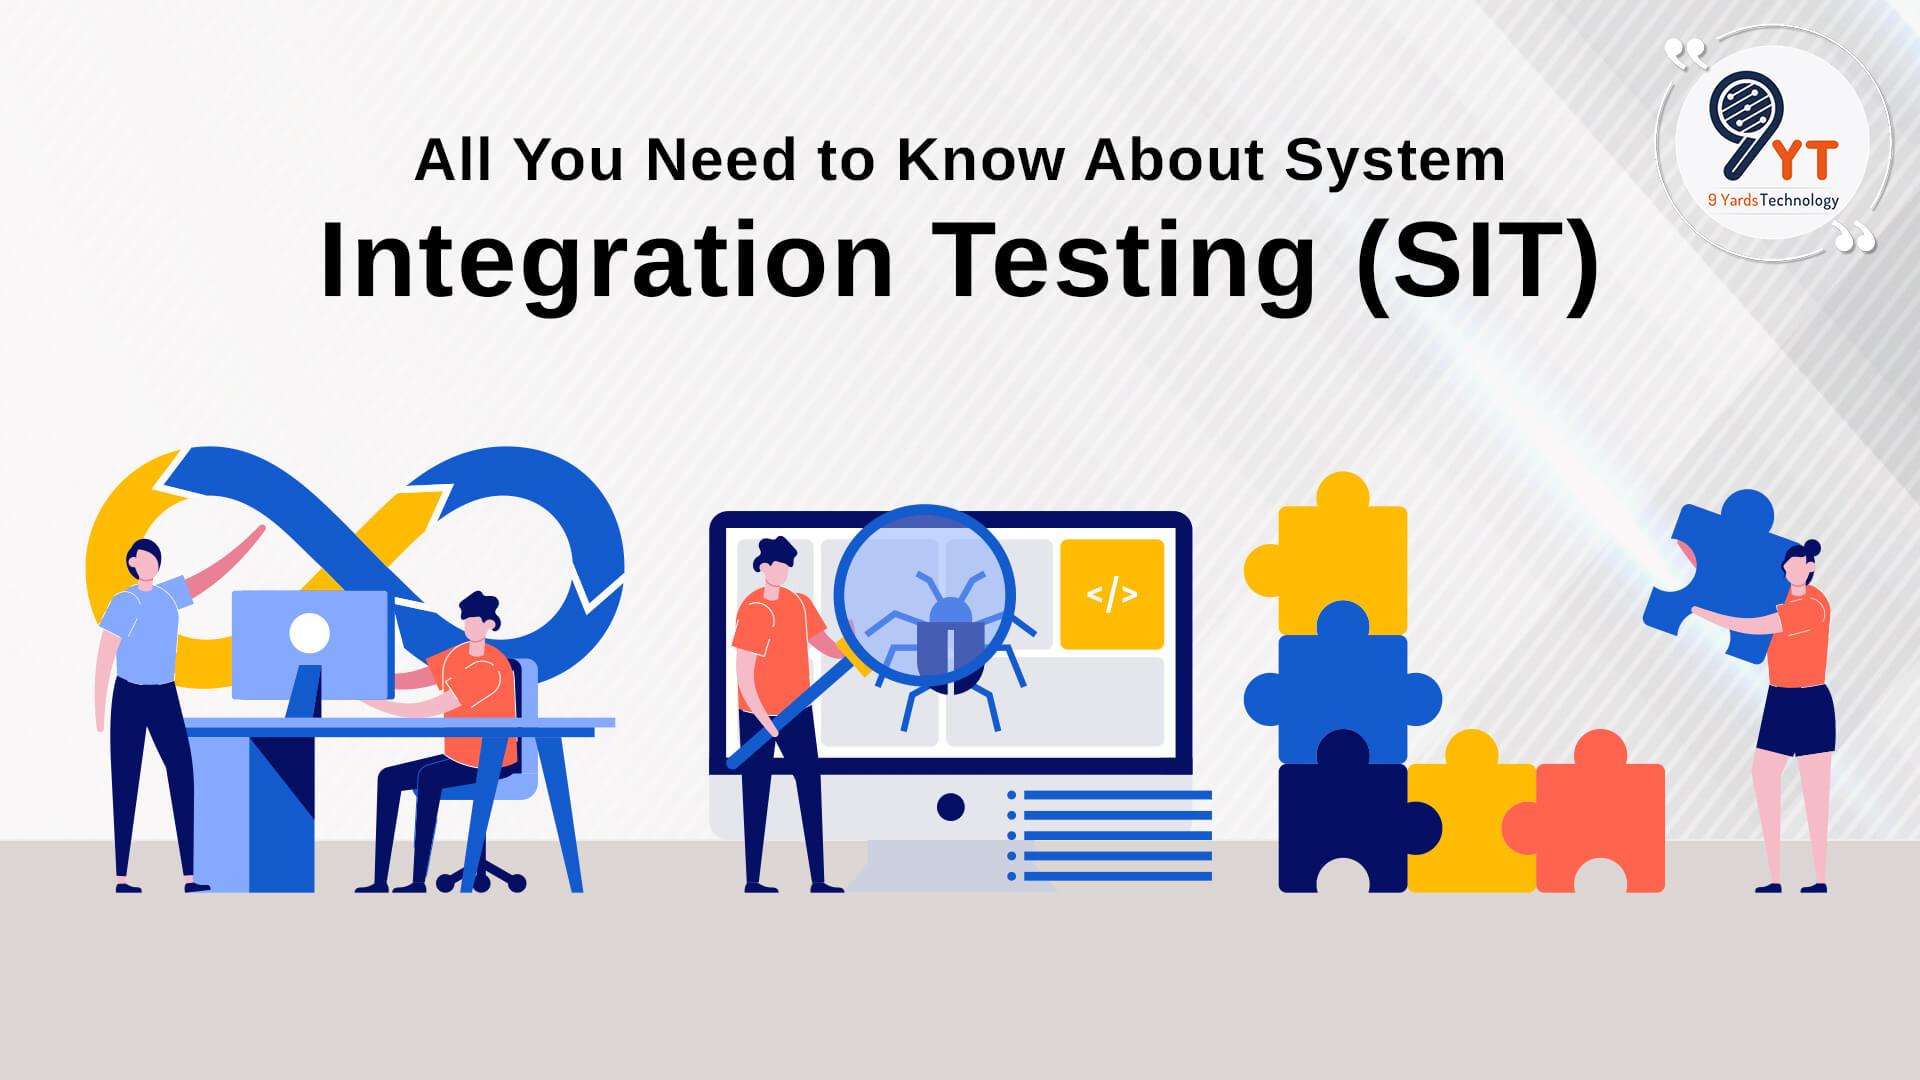 All You Need To Know About System Integration Testing (SIT)!